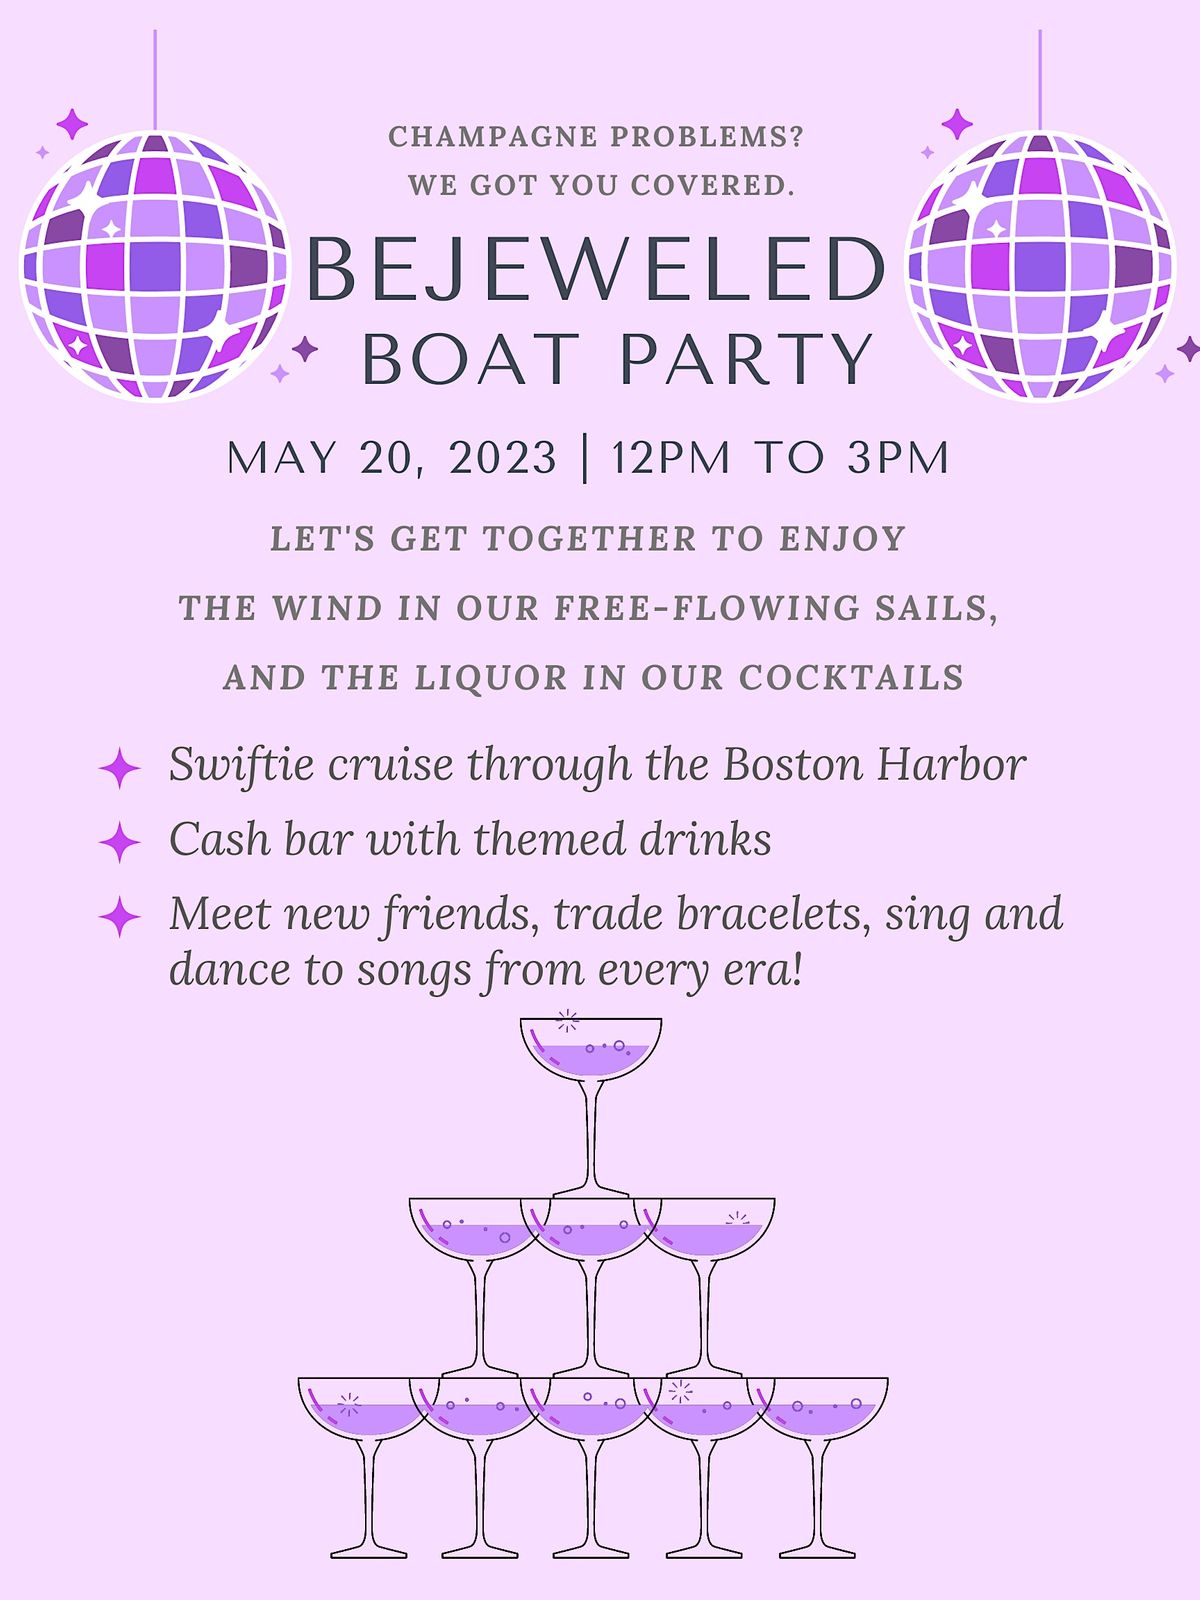 Bejeweled Boat Party | The Swiftie Cruise